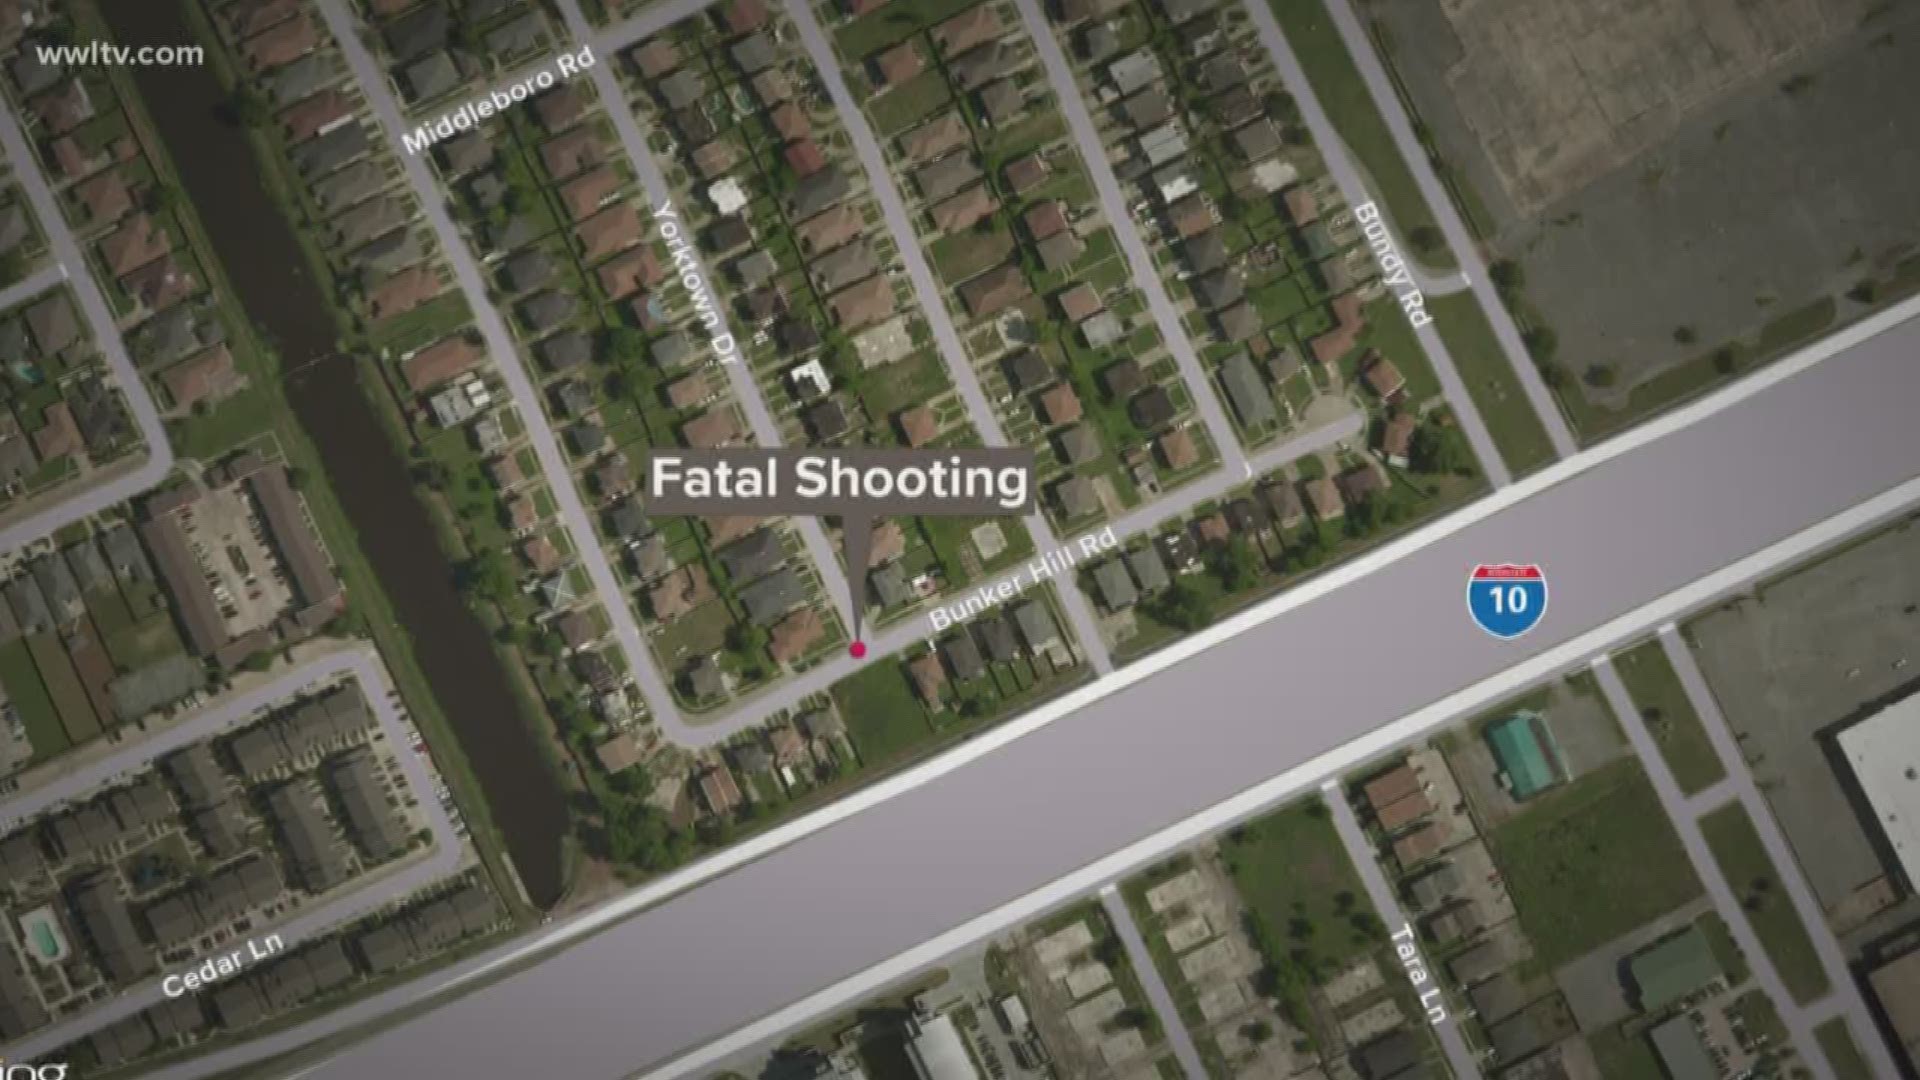 The New Orleans Police Department said the shooting happened around 10 p.m. at the intersection of Bunker Hill Road and Yorktown Drive.